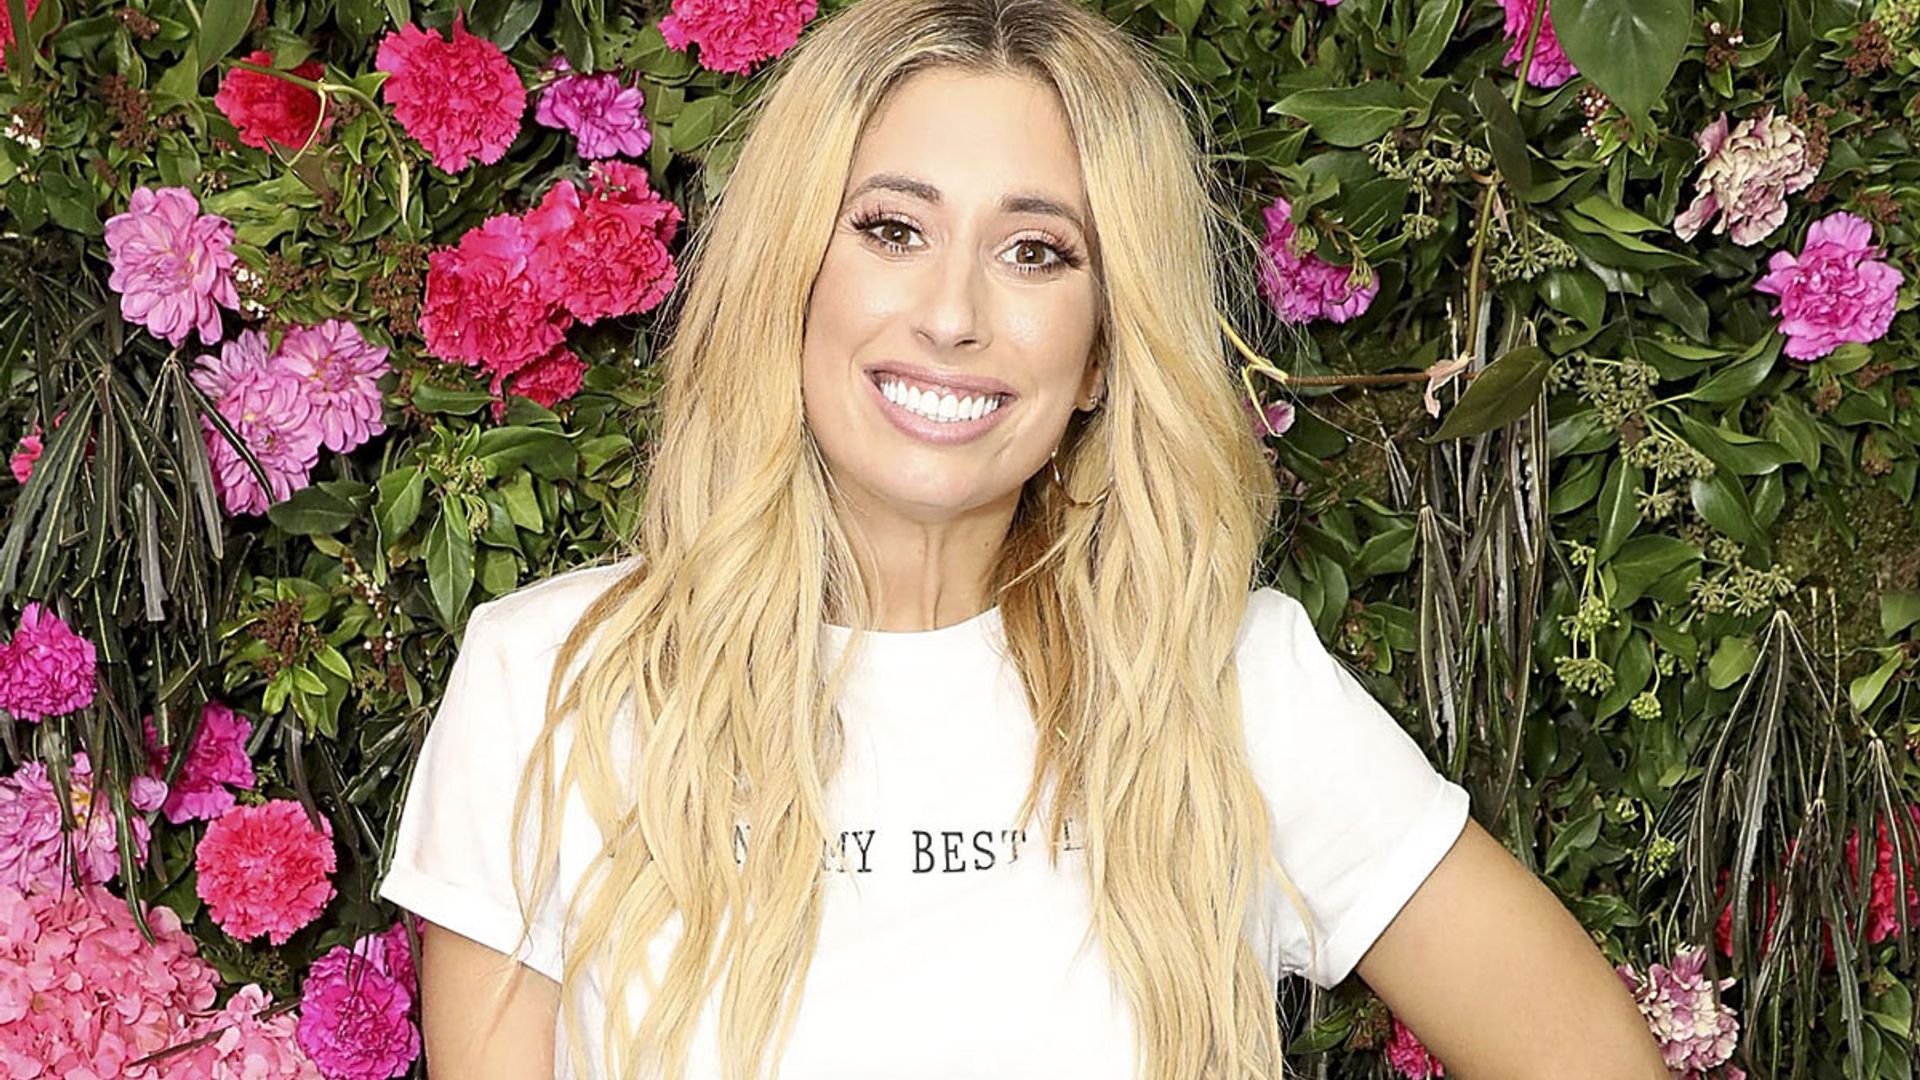 stacey solomon smiling against flowers